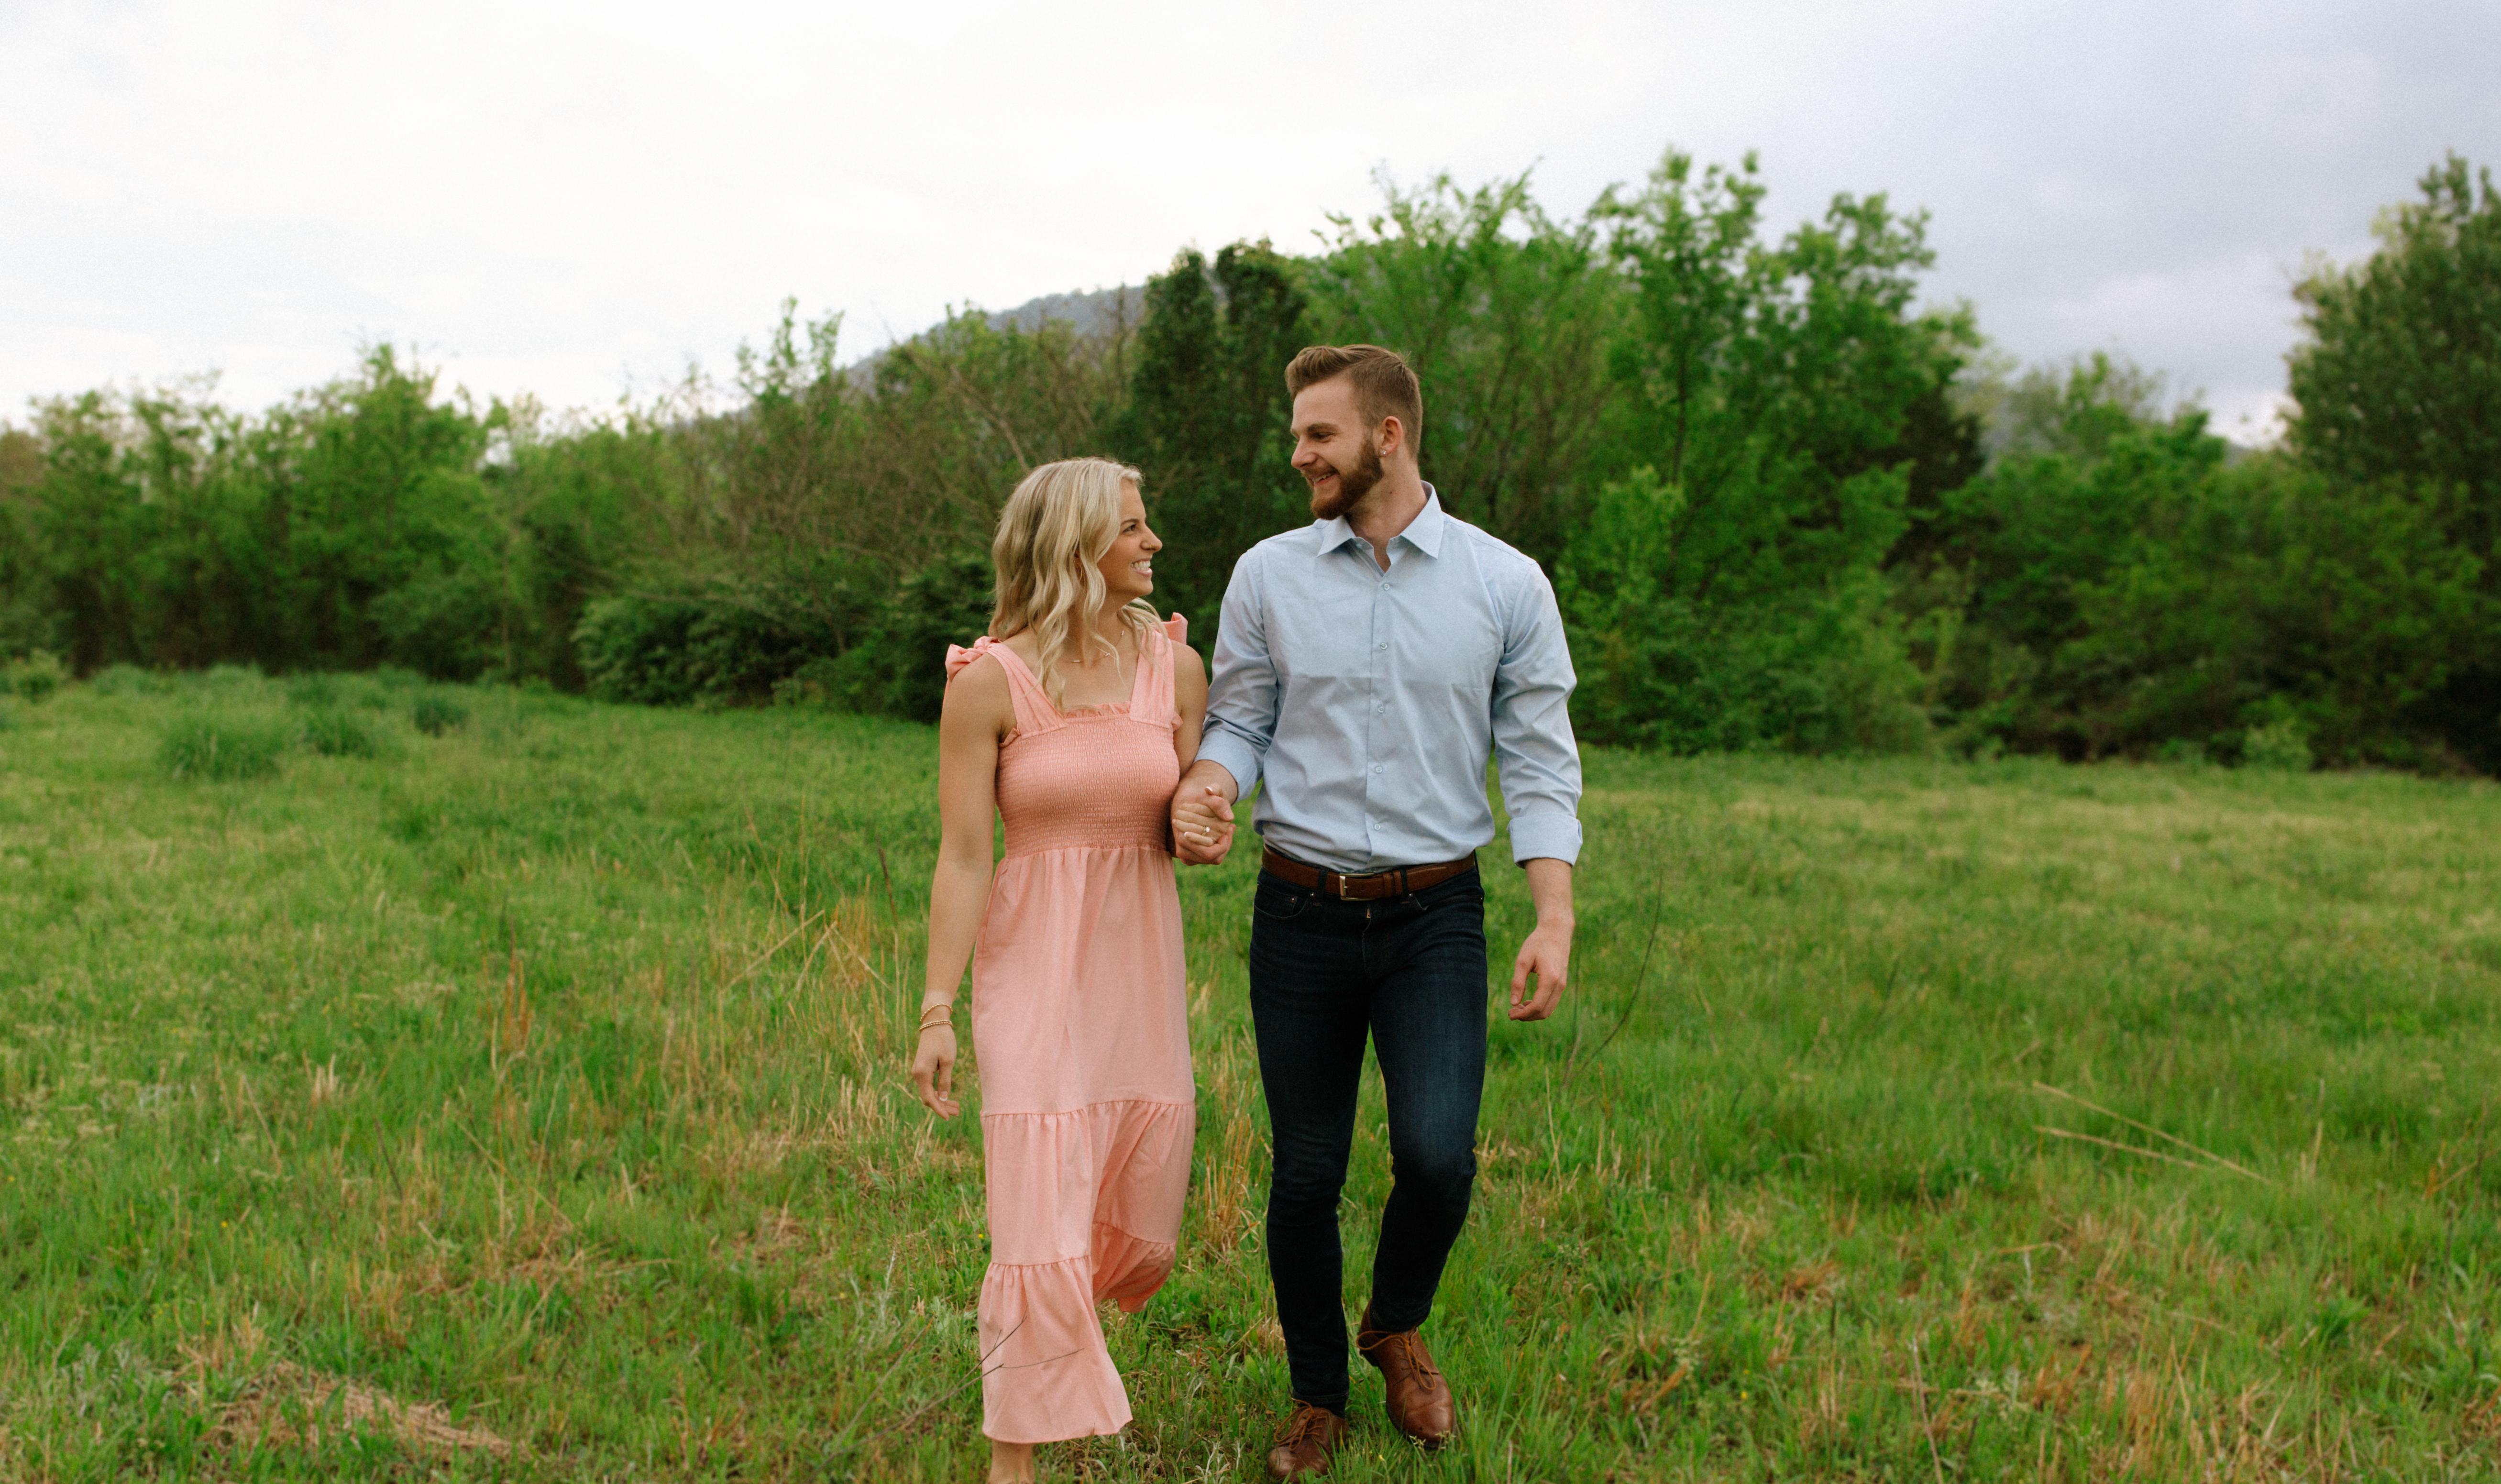 The Wedding Website of Hannah Hinchman and Asher Black